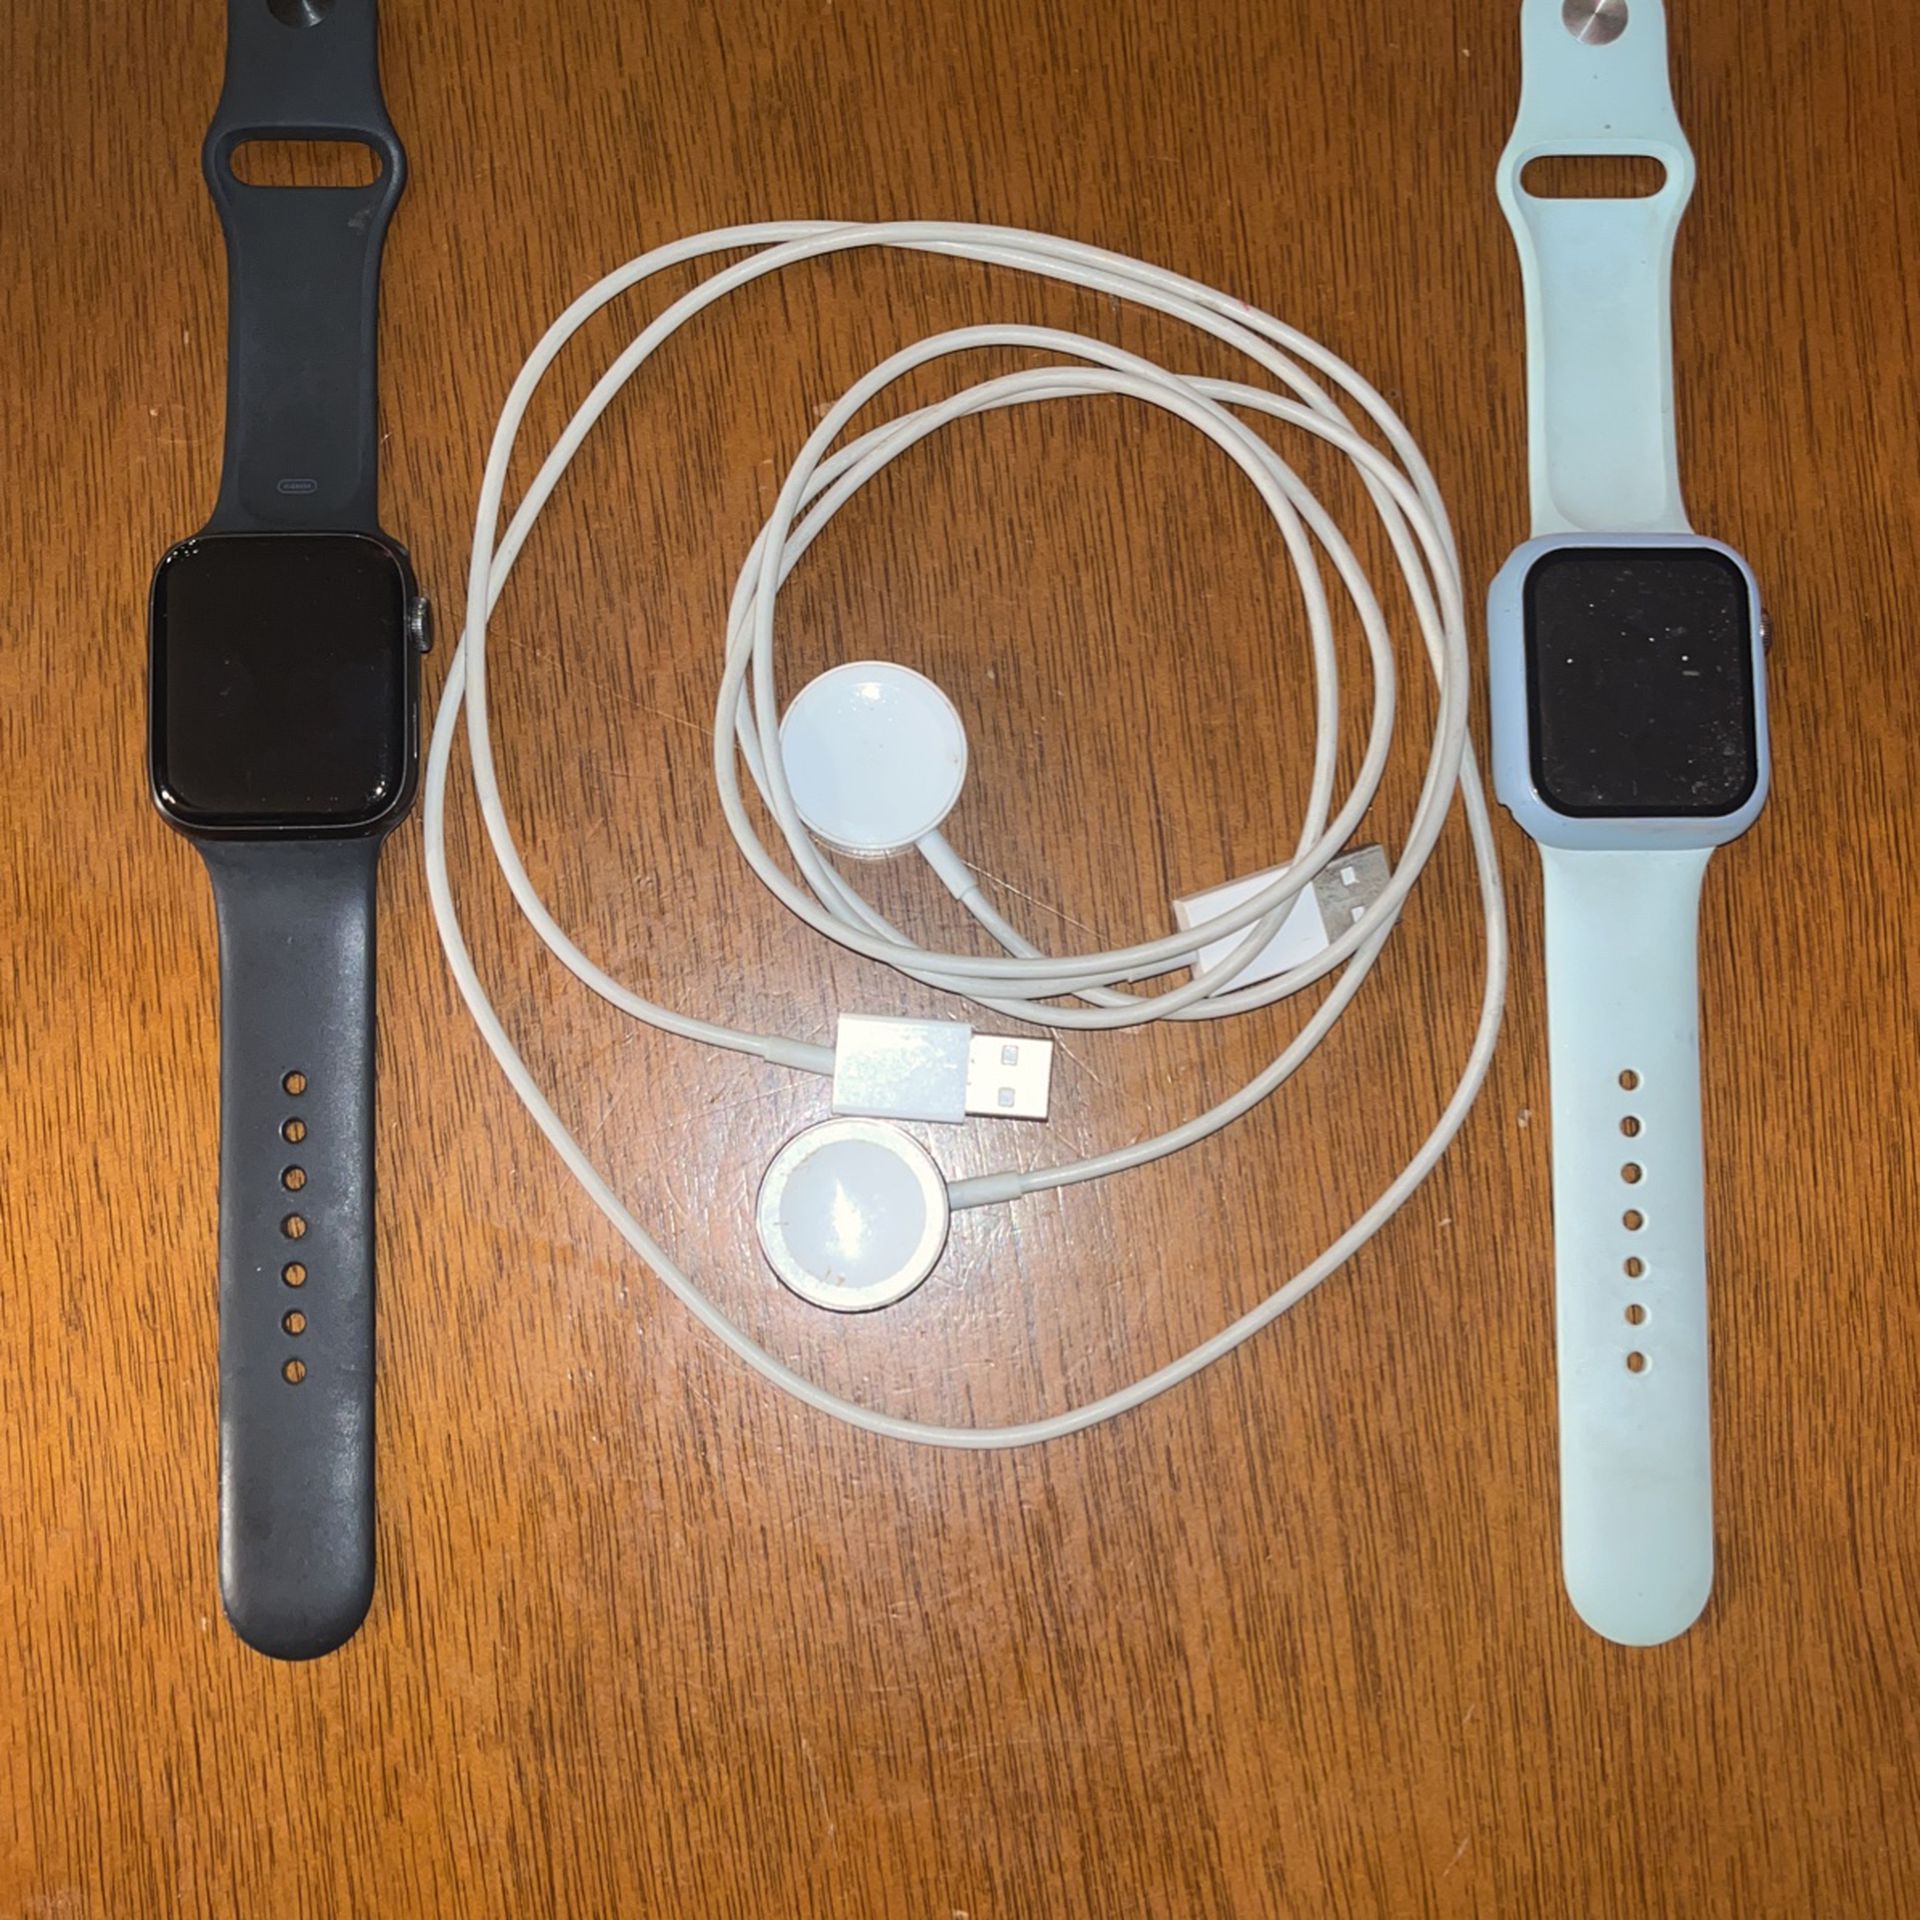 ⚠️APPLE WATCH BUNDLE READ DESCRIPTION/$400 FOR EVERYTHING‼️⚠️ OR BEST OFFER